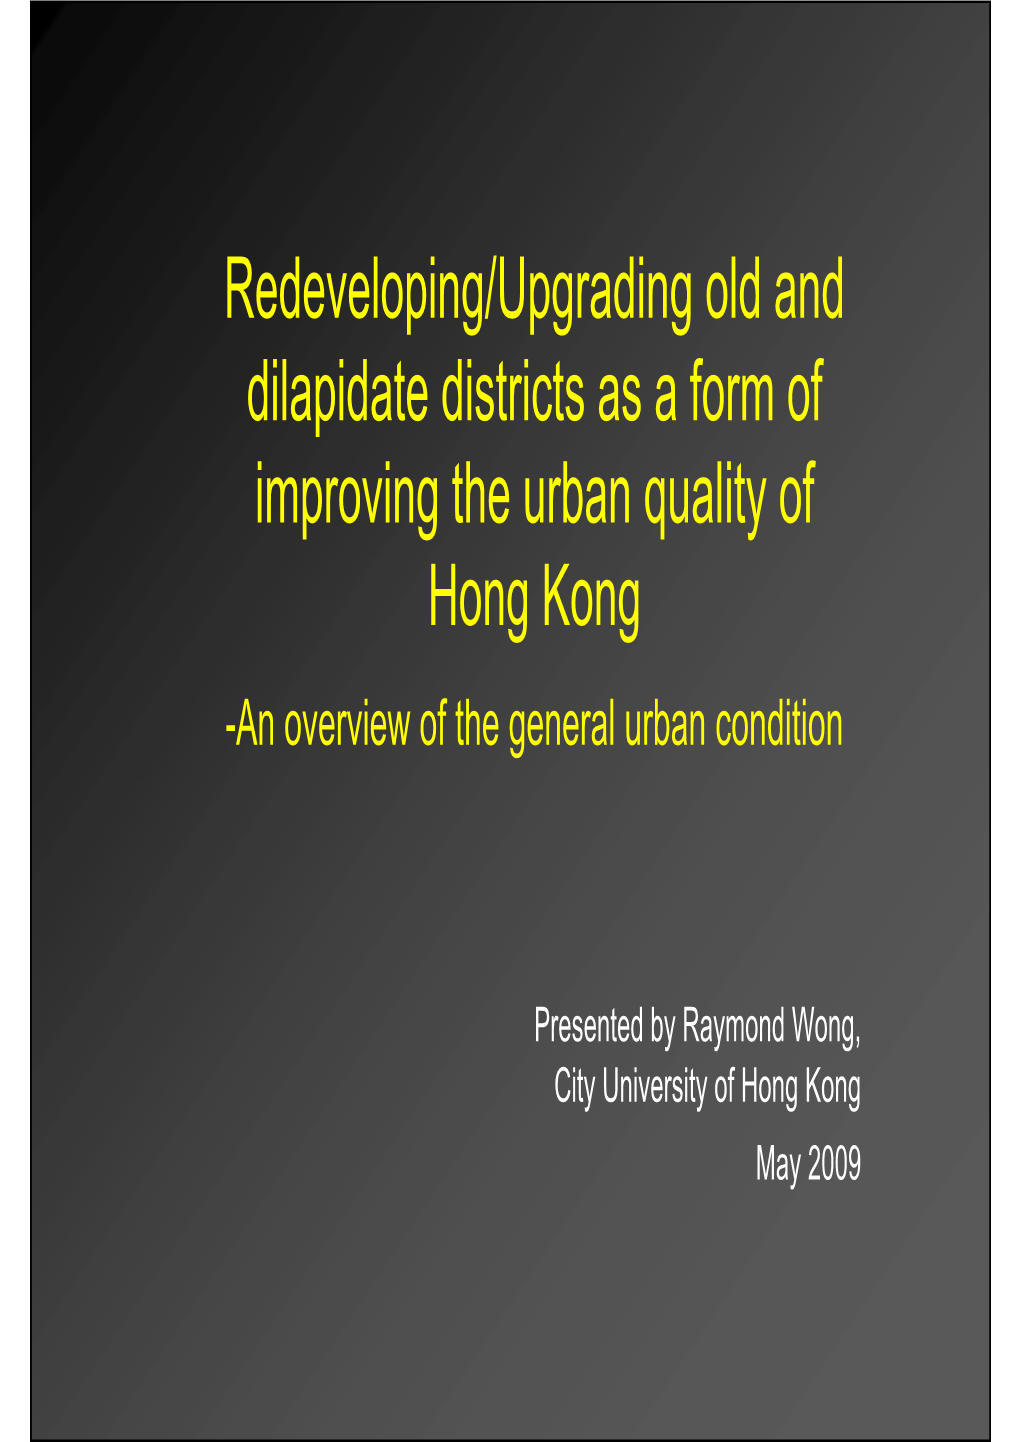 Redeveloping/Upgrading Old and Dilapidate Districts As a Form of Improving the Urban Quality of Hong Kong -An Overview of the General Urban Condition